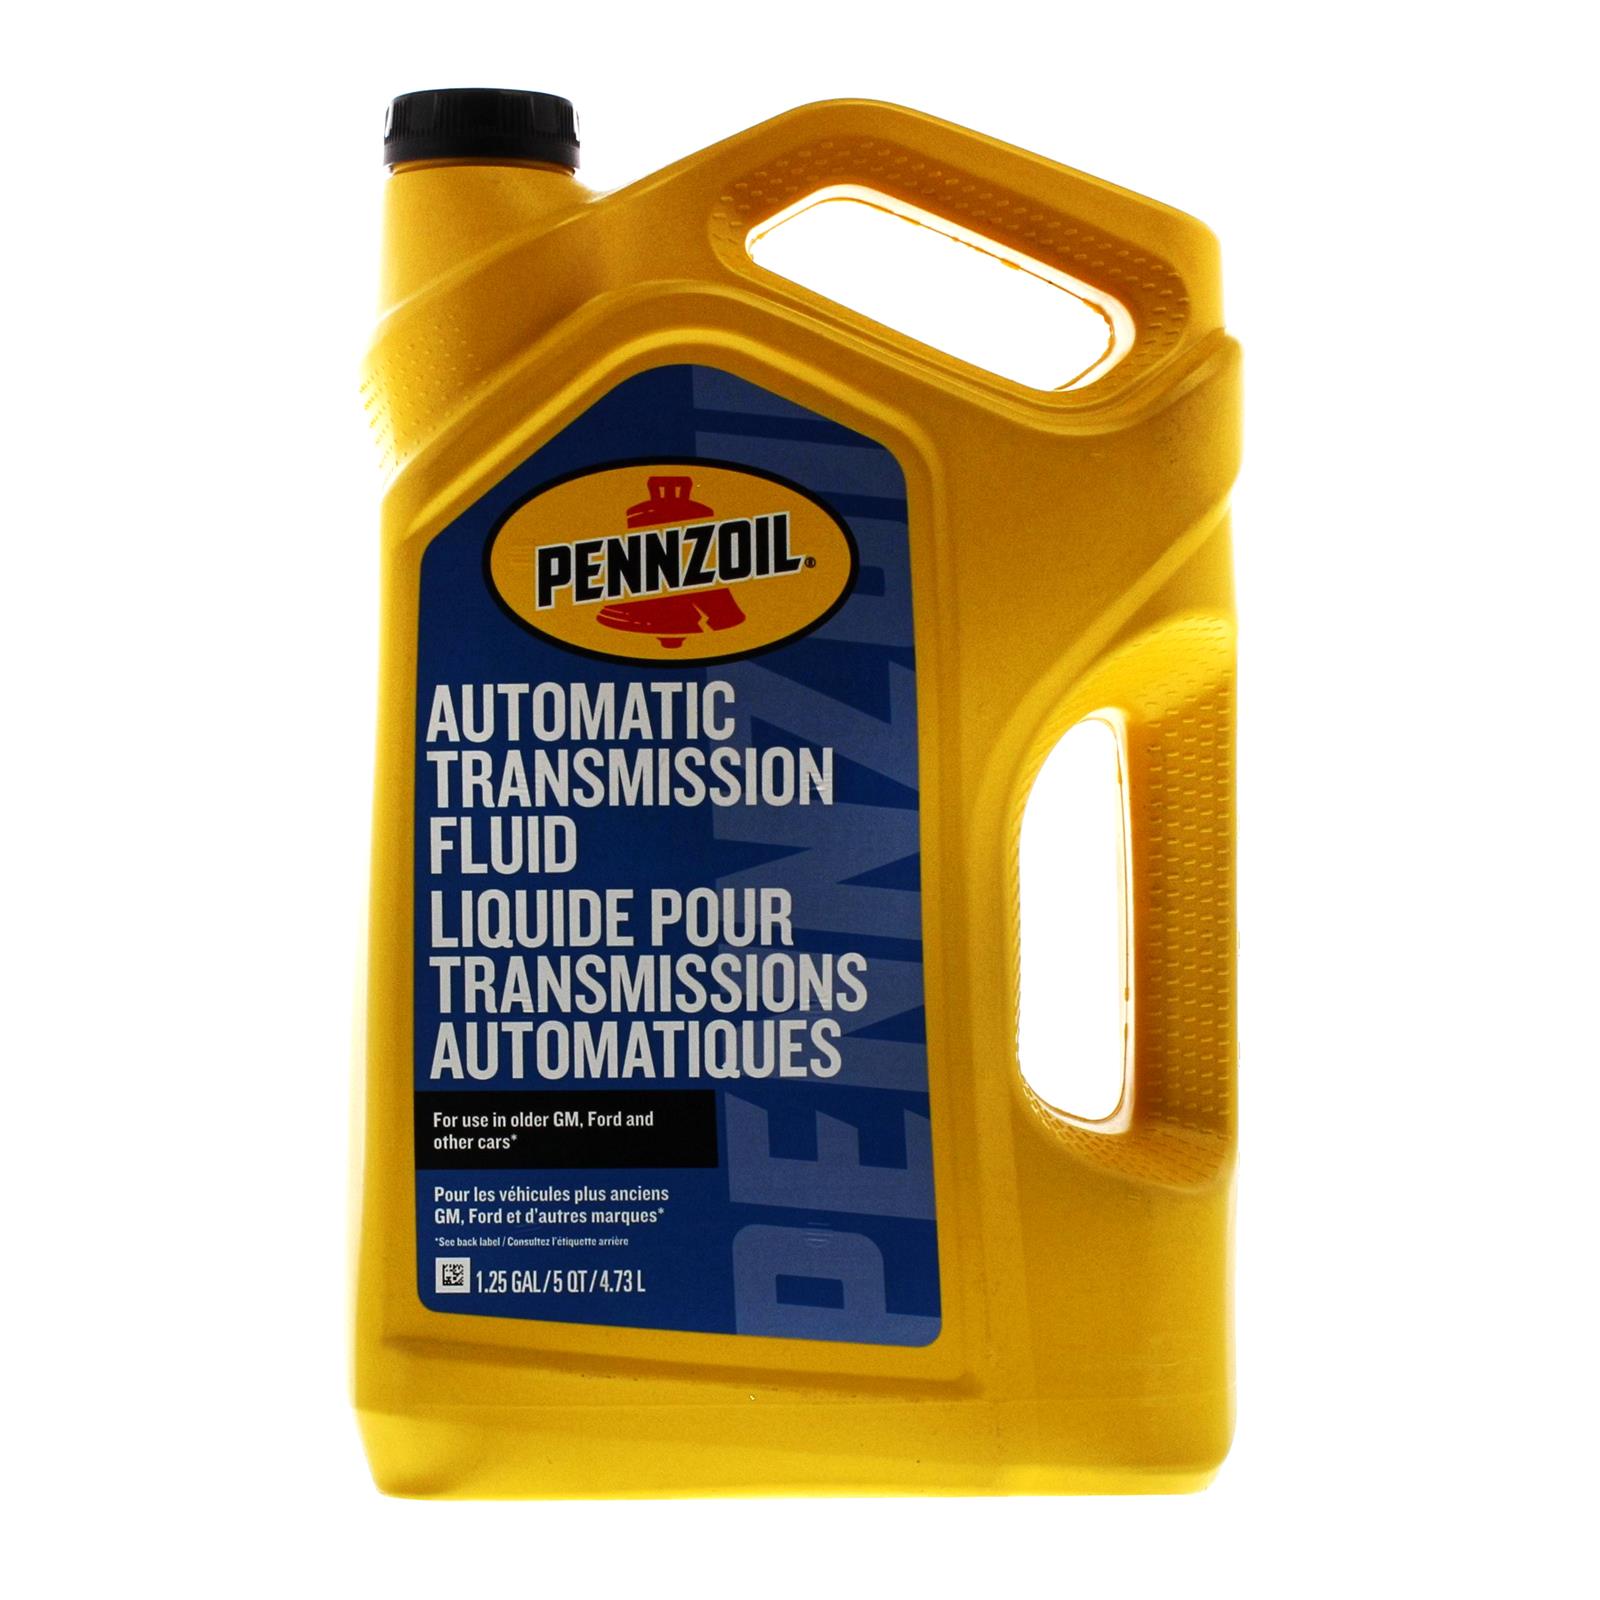 PENNZOIL, ATF, Auto Transmissions, Automatic Transmission Fluid -  49DR42